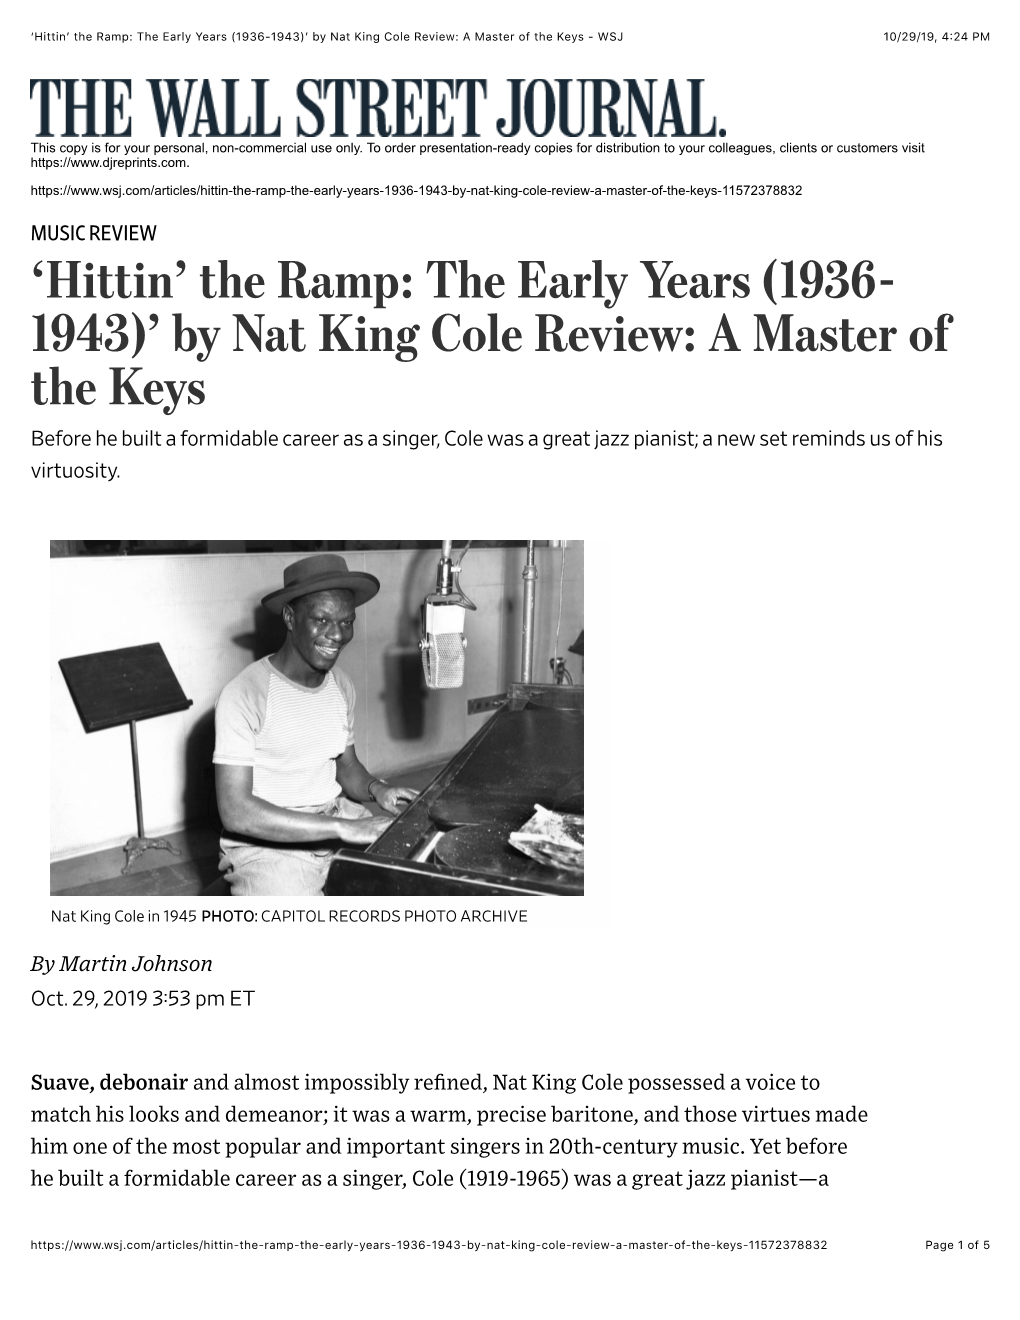 Wall Street Journal Reviews Nat King Cole